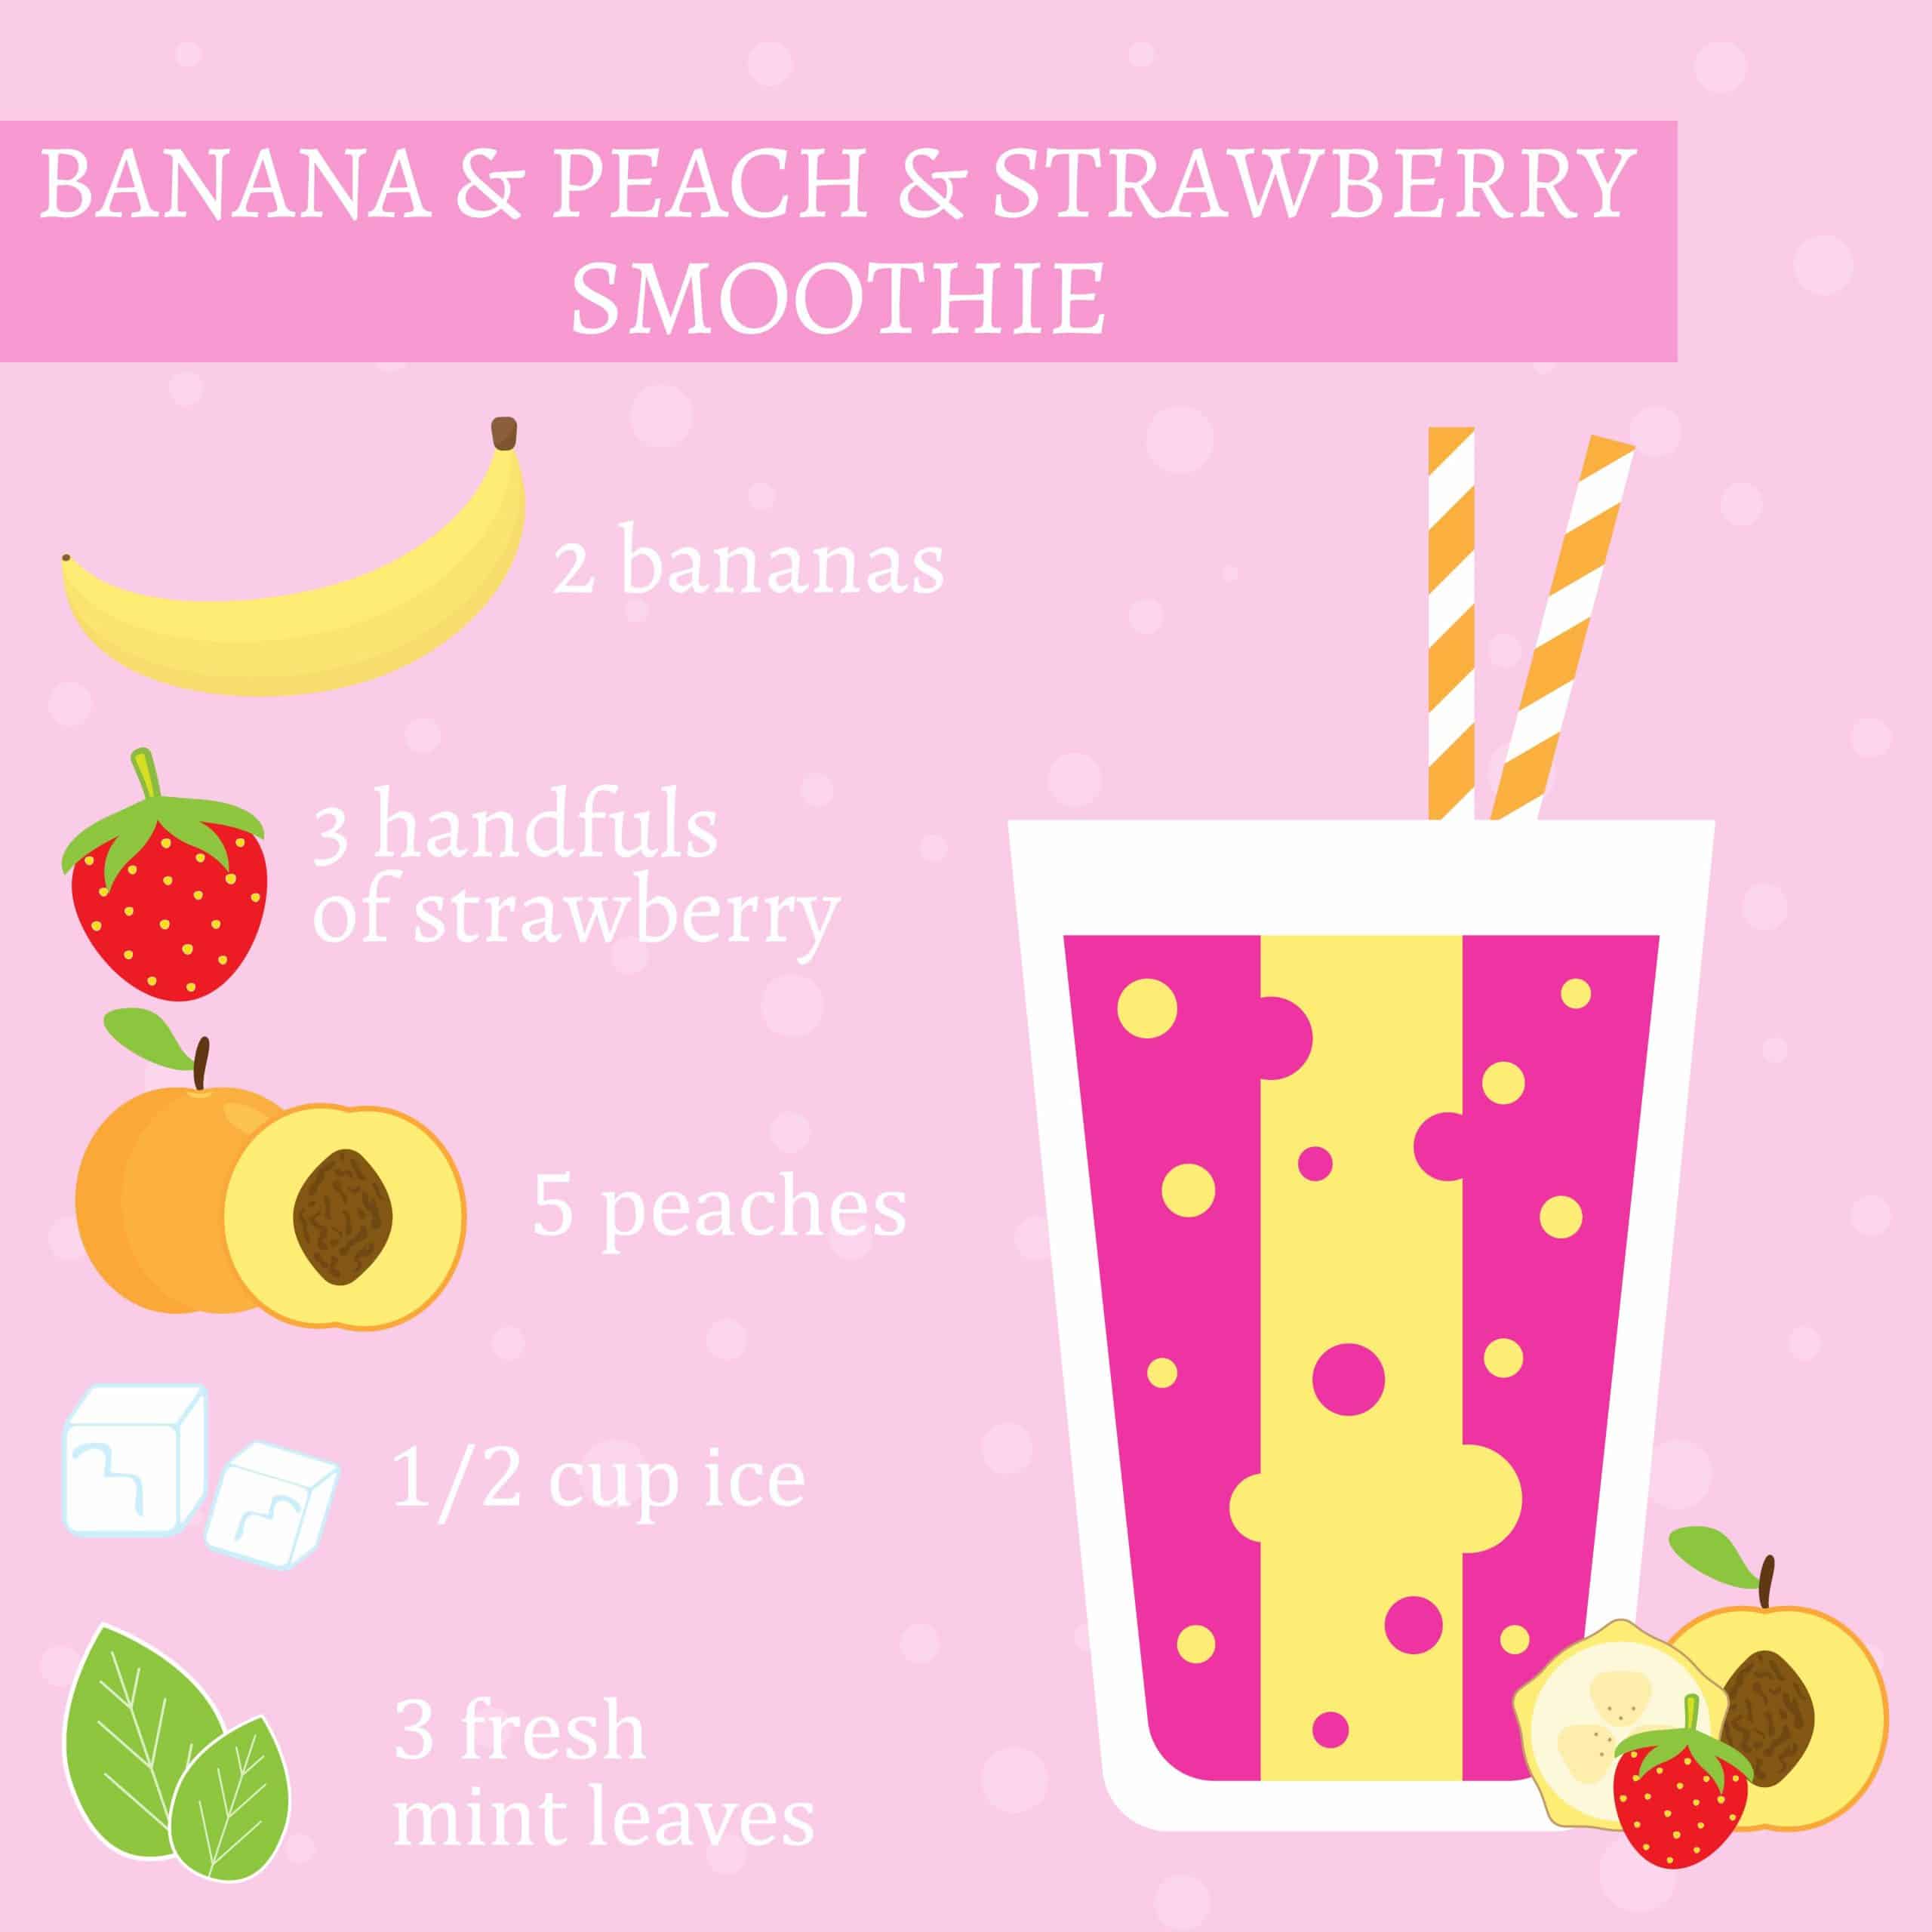 All the ingredients you need to make a banana, peach and strawberry ...